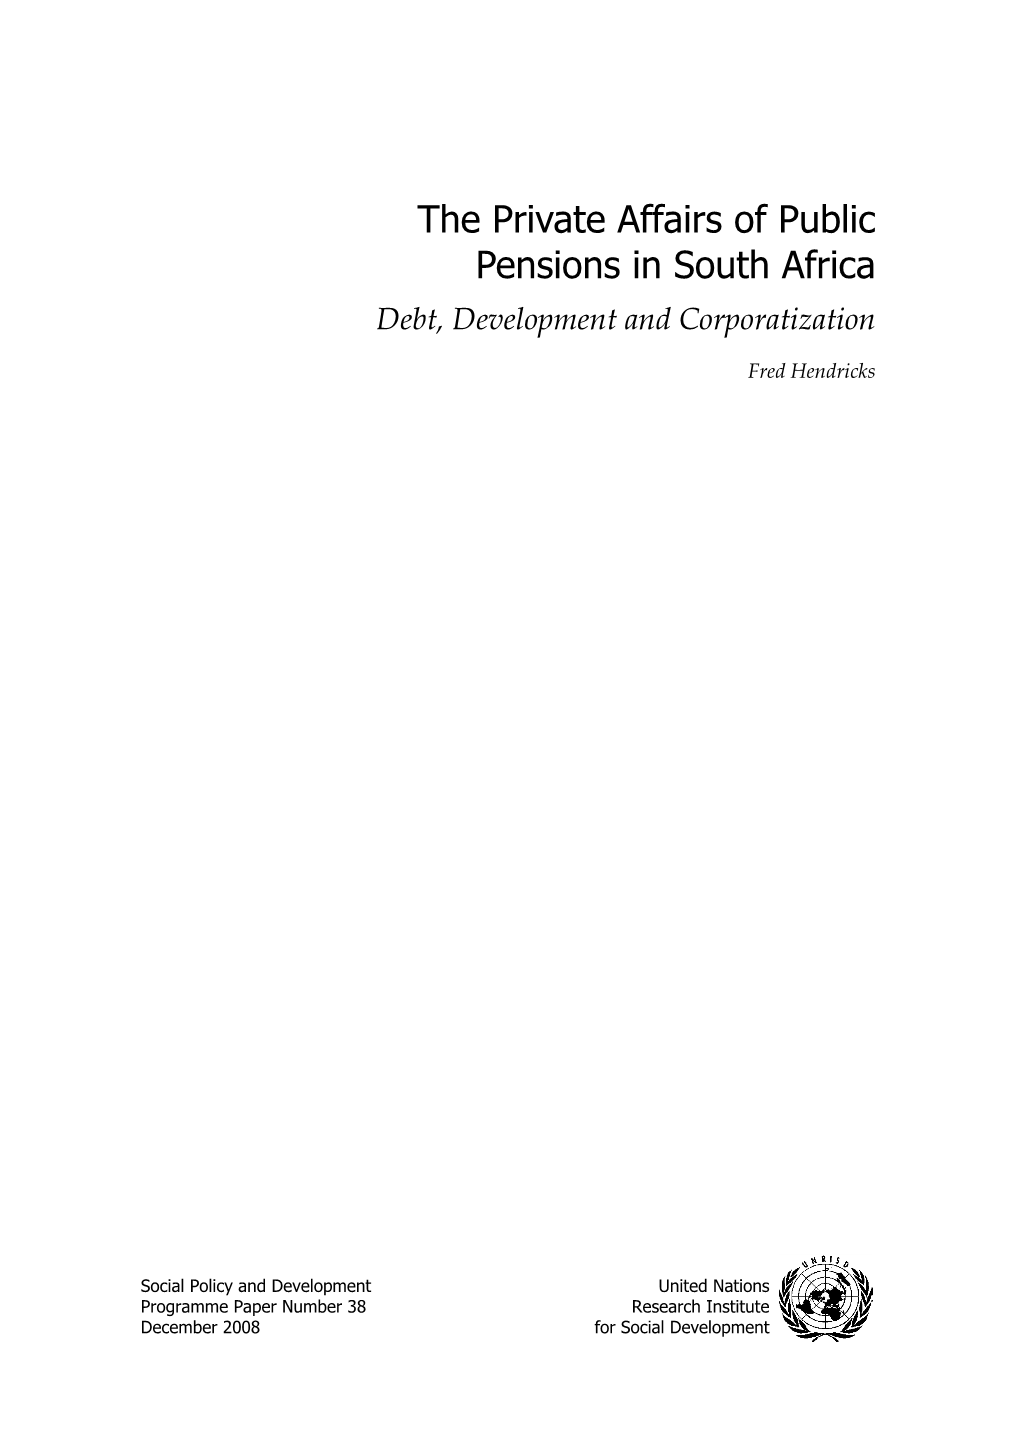 The Private Affairs of Public Pensions in South Africa Debt, Development and Corporatization